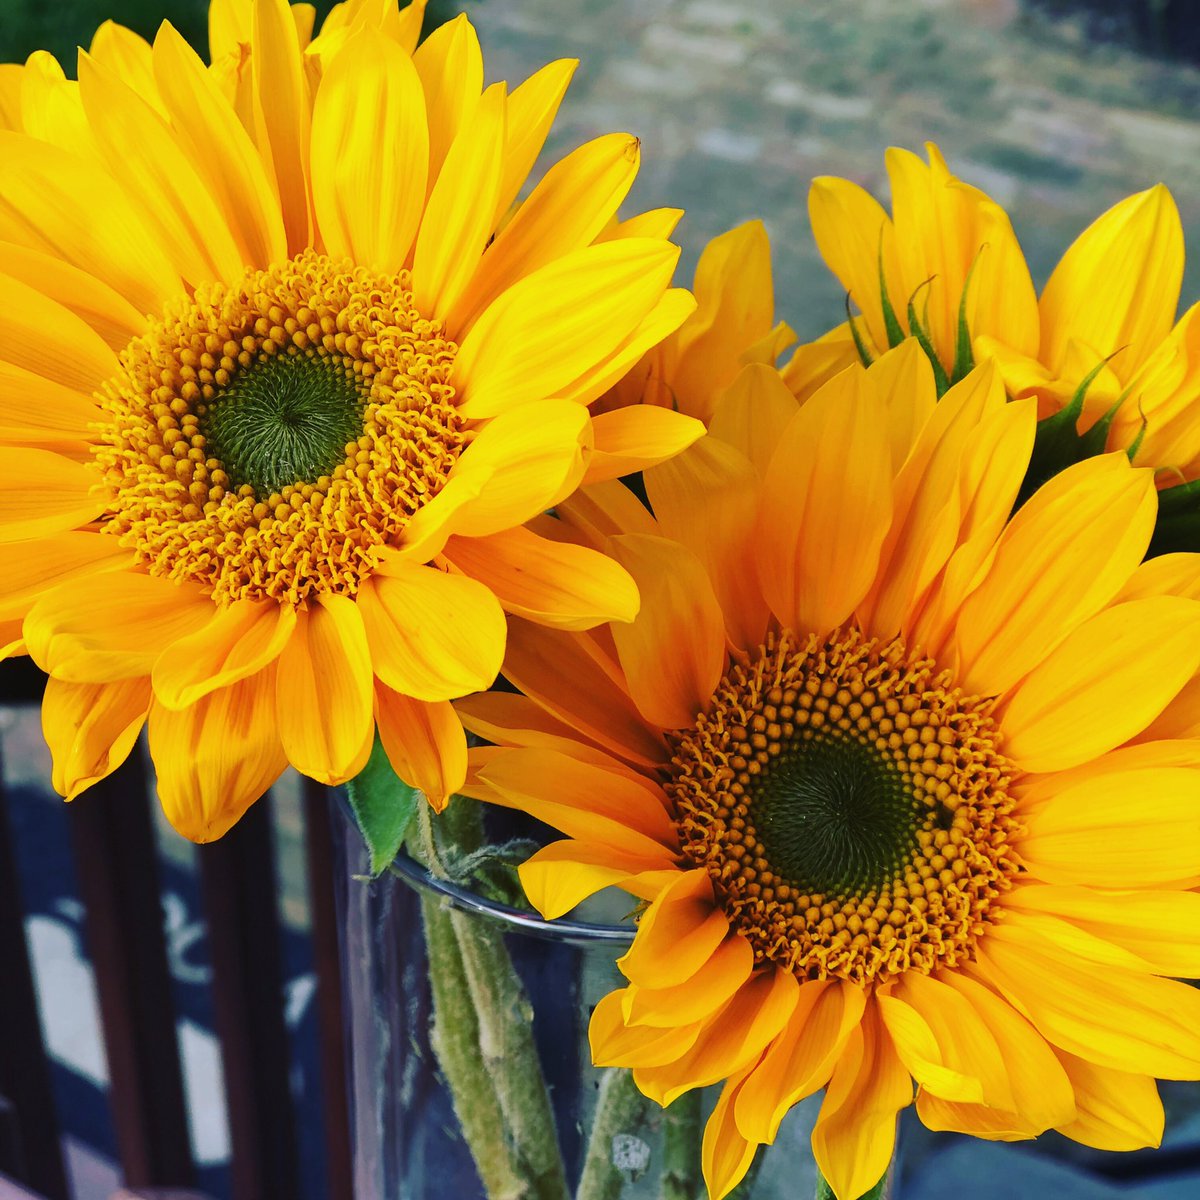 A sunflower chooses to face the sun every day. Every single day. We can, too. ☀️ Sunshine ☀️ ✨ Positivity ✨
🌻 Beauty 🌻 #mindfulliving #mindfulness #ChooseYourStory